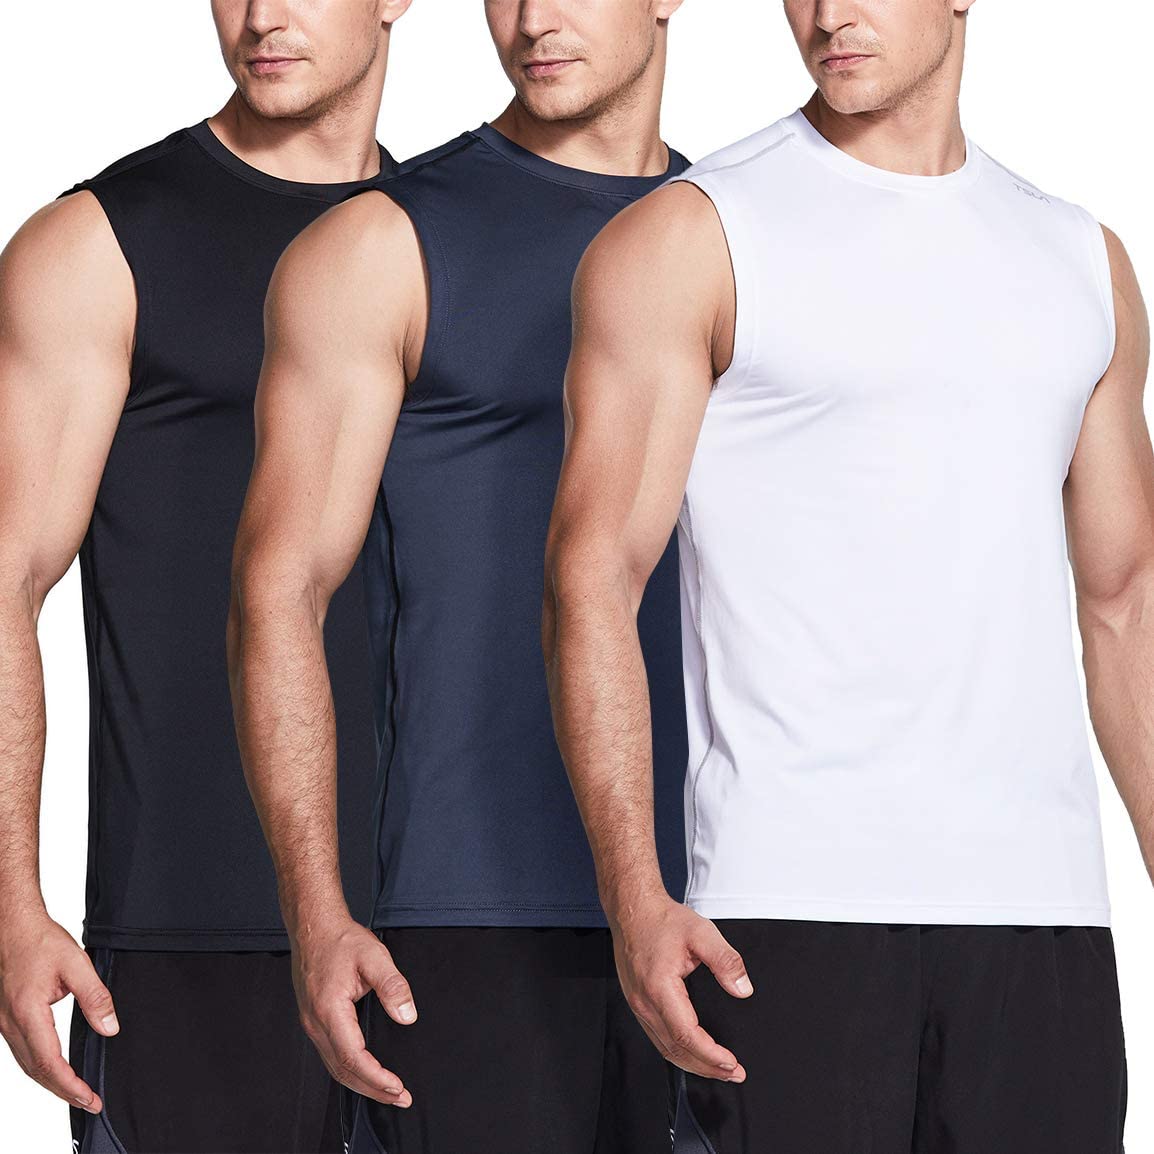 Performance Athletic Muscle Shirts TSLA 1 or 3 Pack Mens Sleeveless Running Tank Top Dry Fit Workout Gym Tank Tops